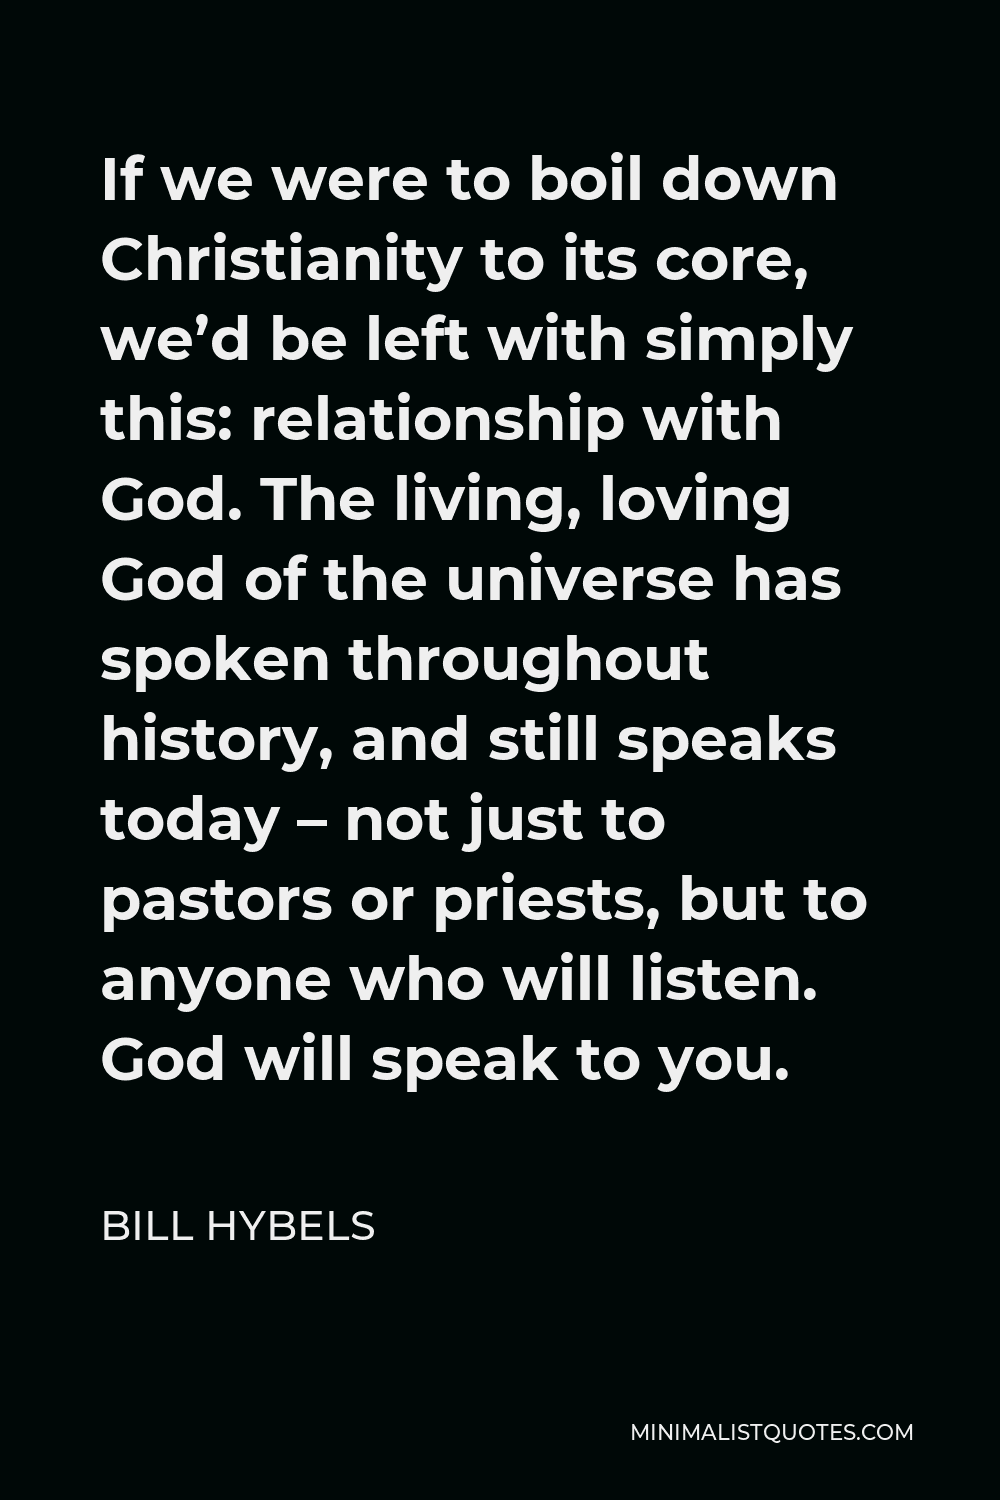 Bill Hybels Quote - If we were to boil down Christianity to its core, we’d be left with simply this: relationship with God. The living, loving God of the universe has spoken throughout history, and still speaks today – not just to pastors or priests, but to anyone who will listen. God will speak to you.